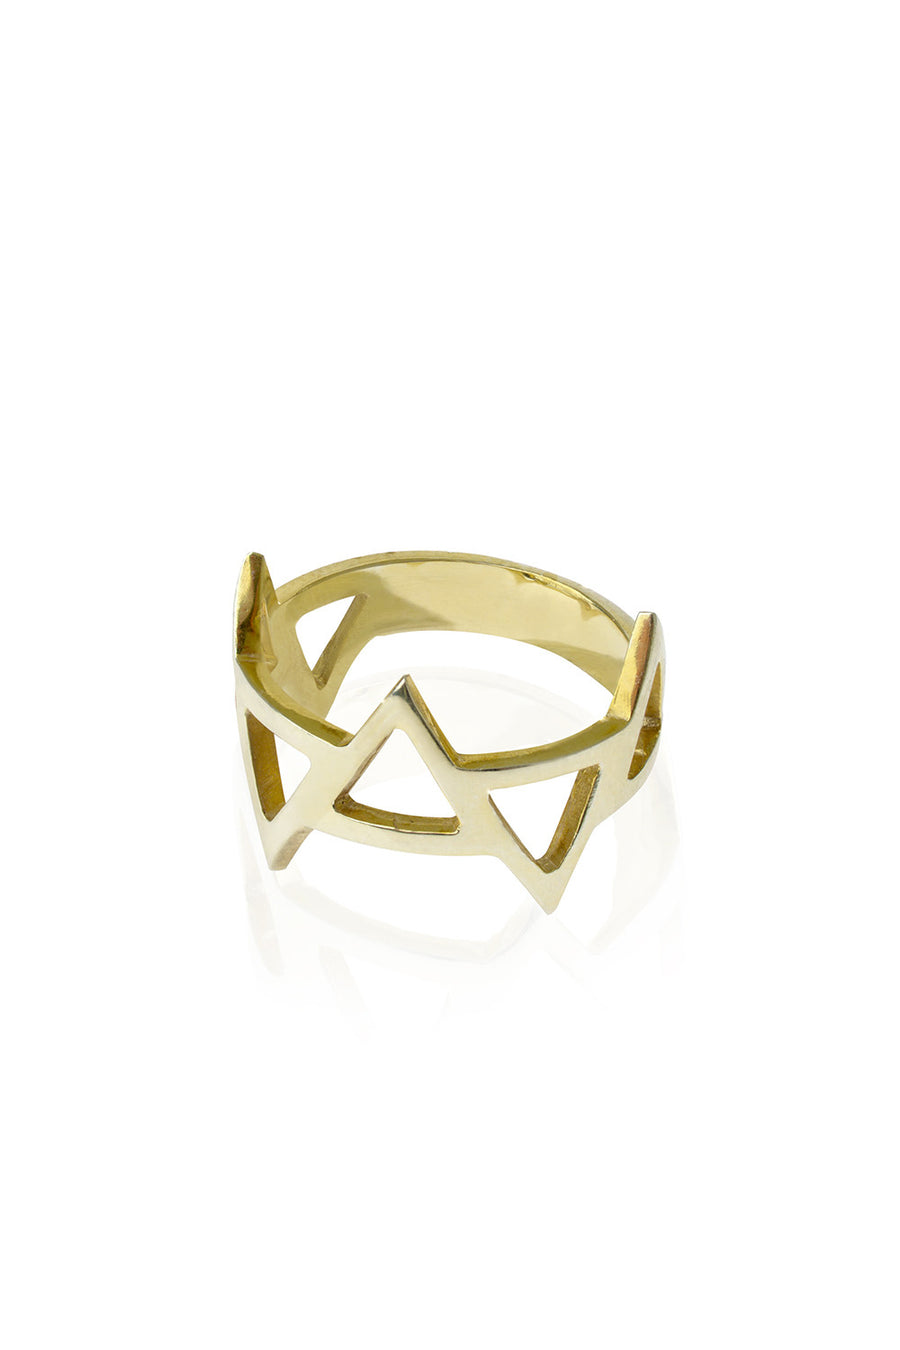 Ladder of Life, Gold Ring